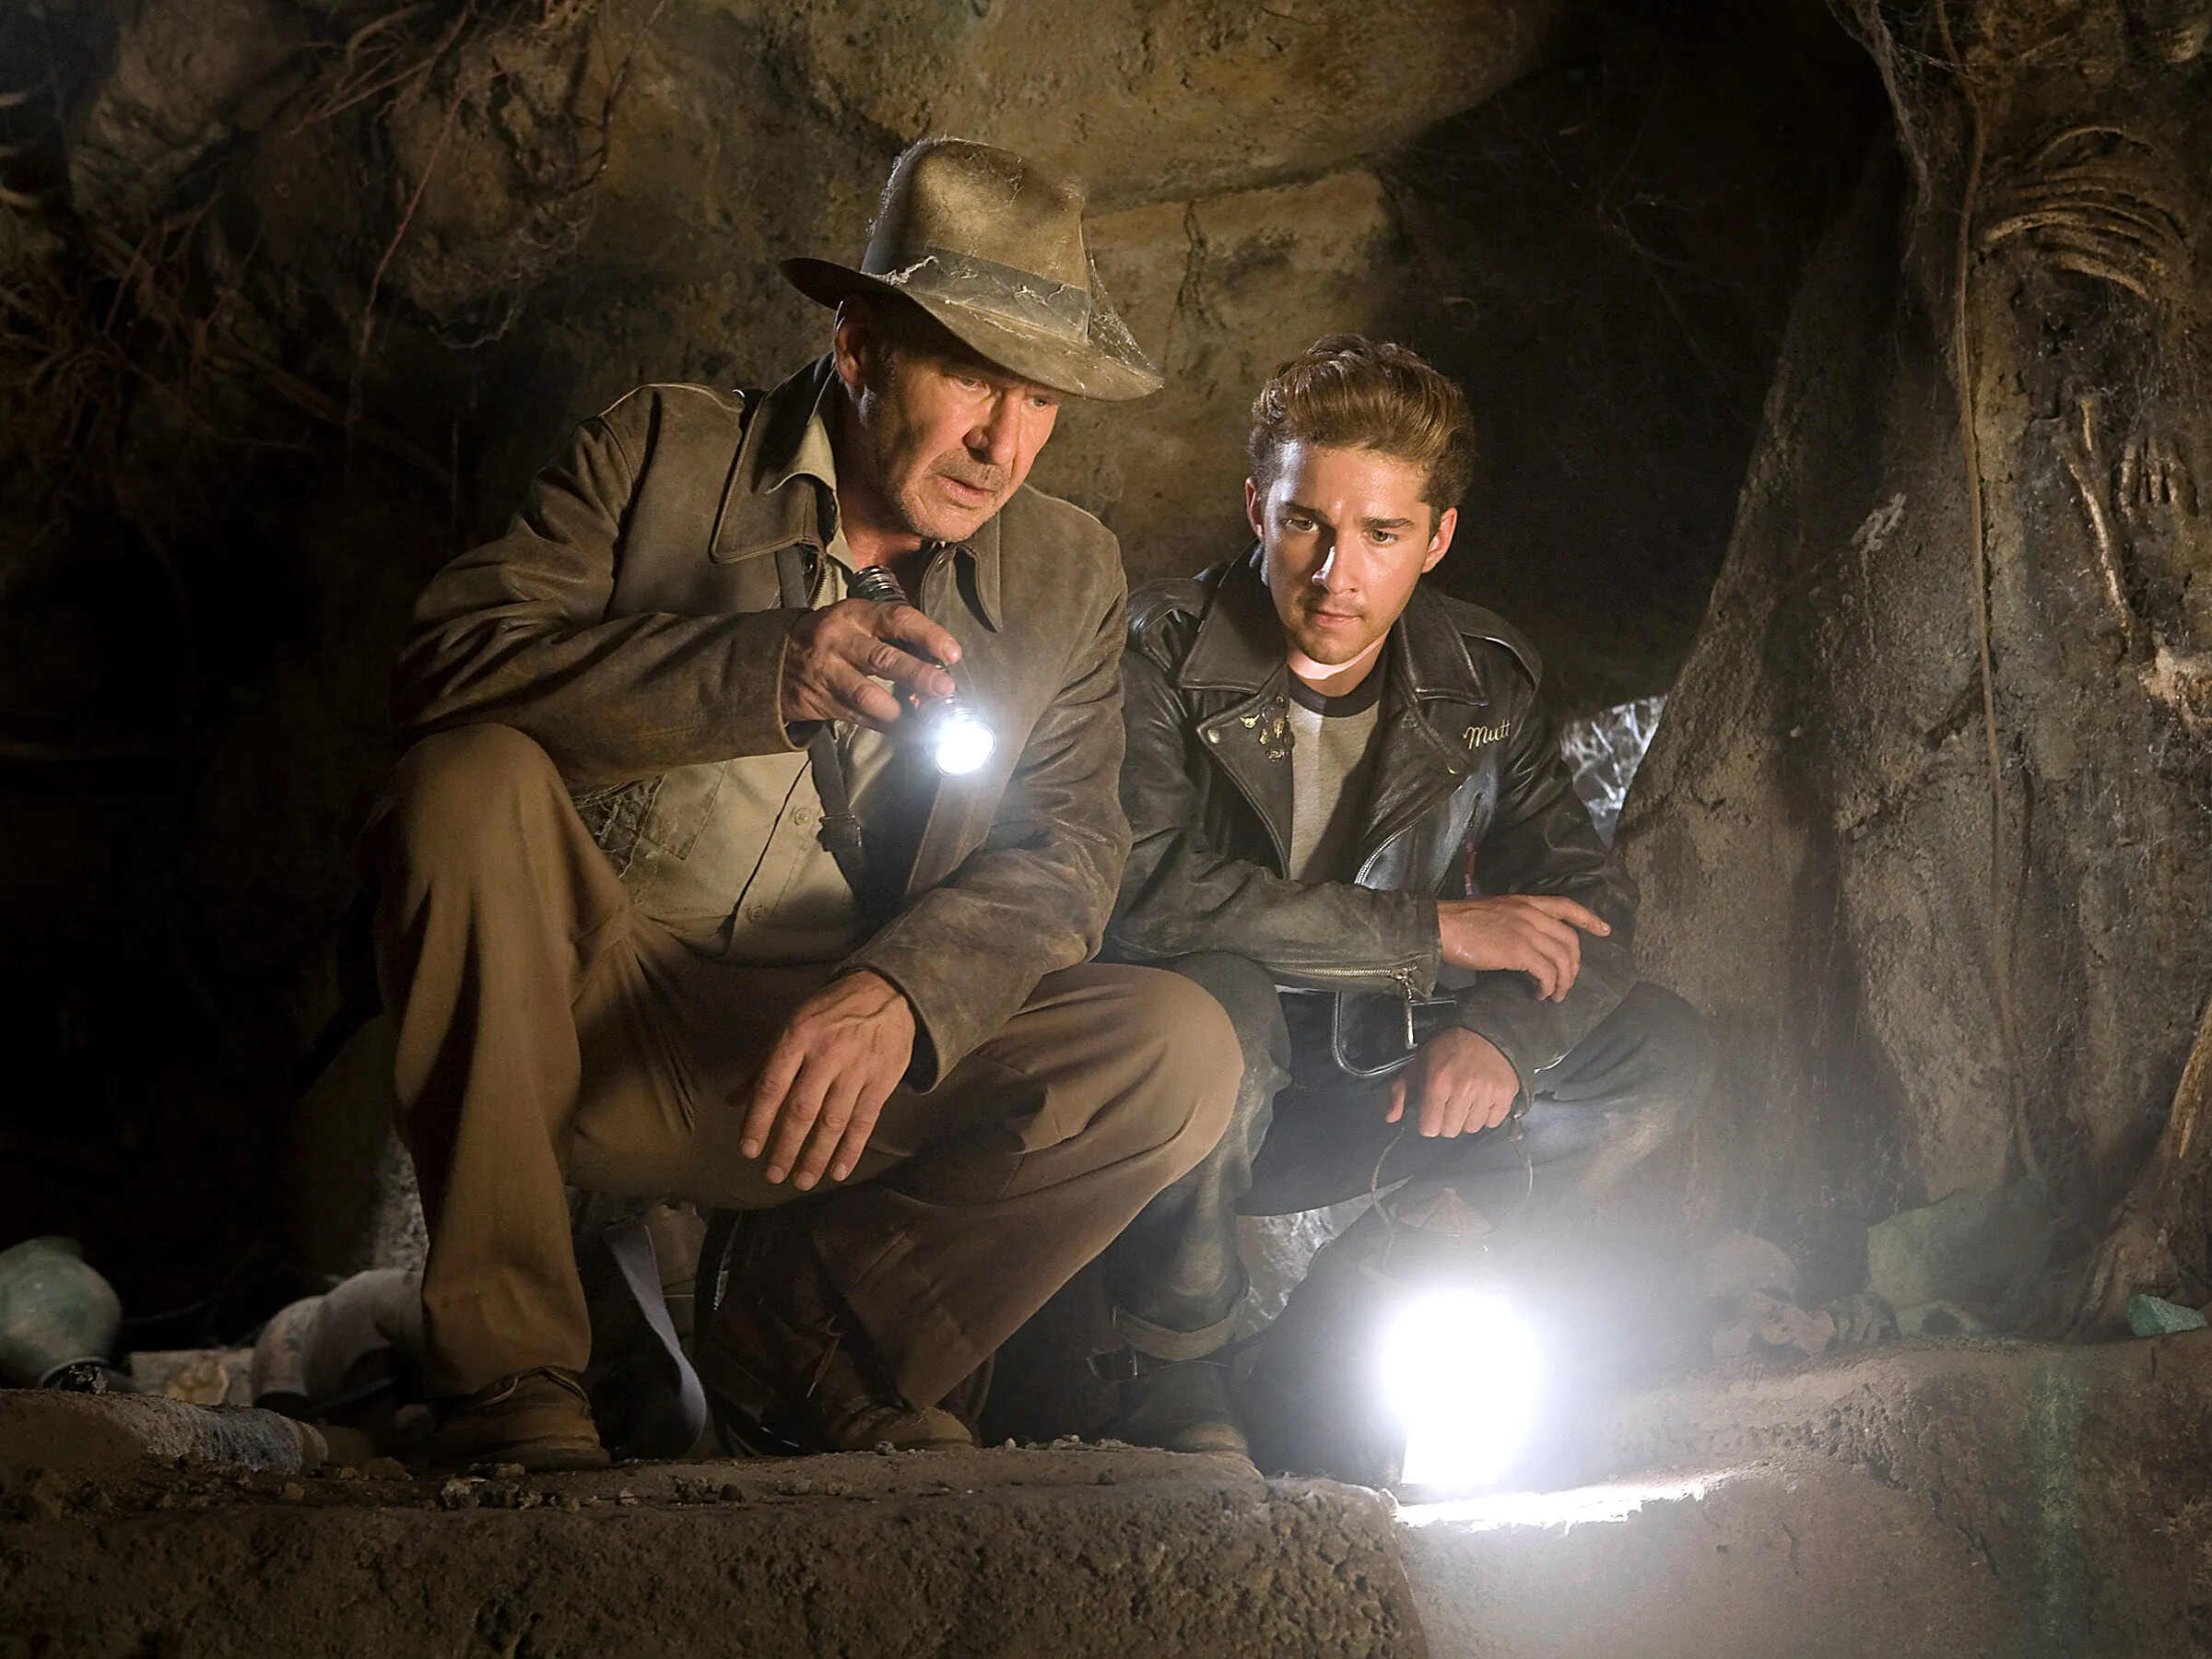 38-facts-about-the-movie-indiana-jones-and-the-kingdom-of-the-crystal-skull